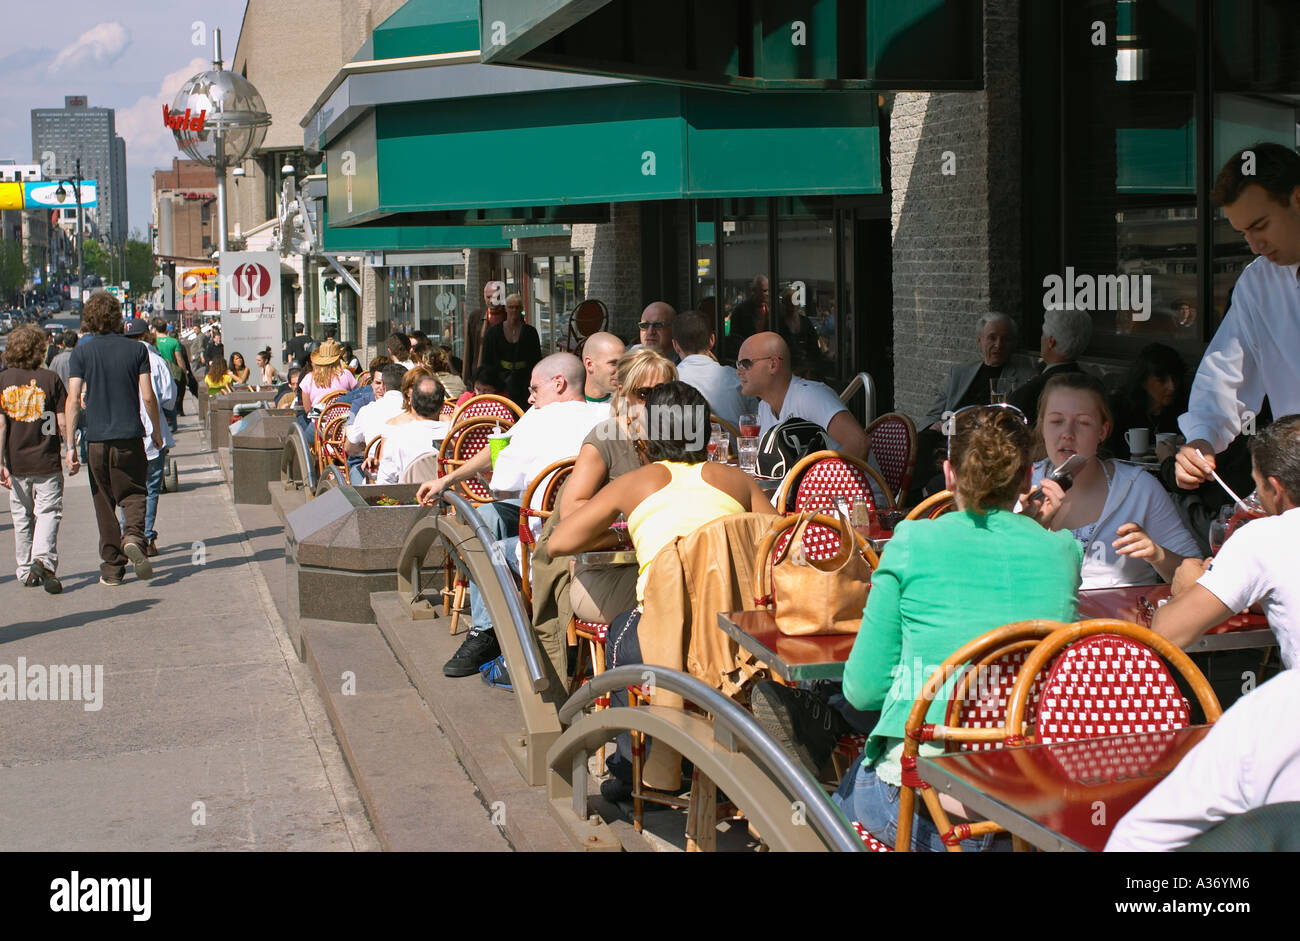 People eating and drinking in street cafe / restaurant on St. Catherine Street in Montreal, Quebec, Canada. Stock Photo